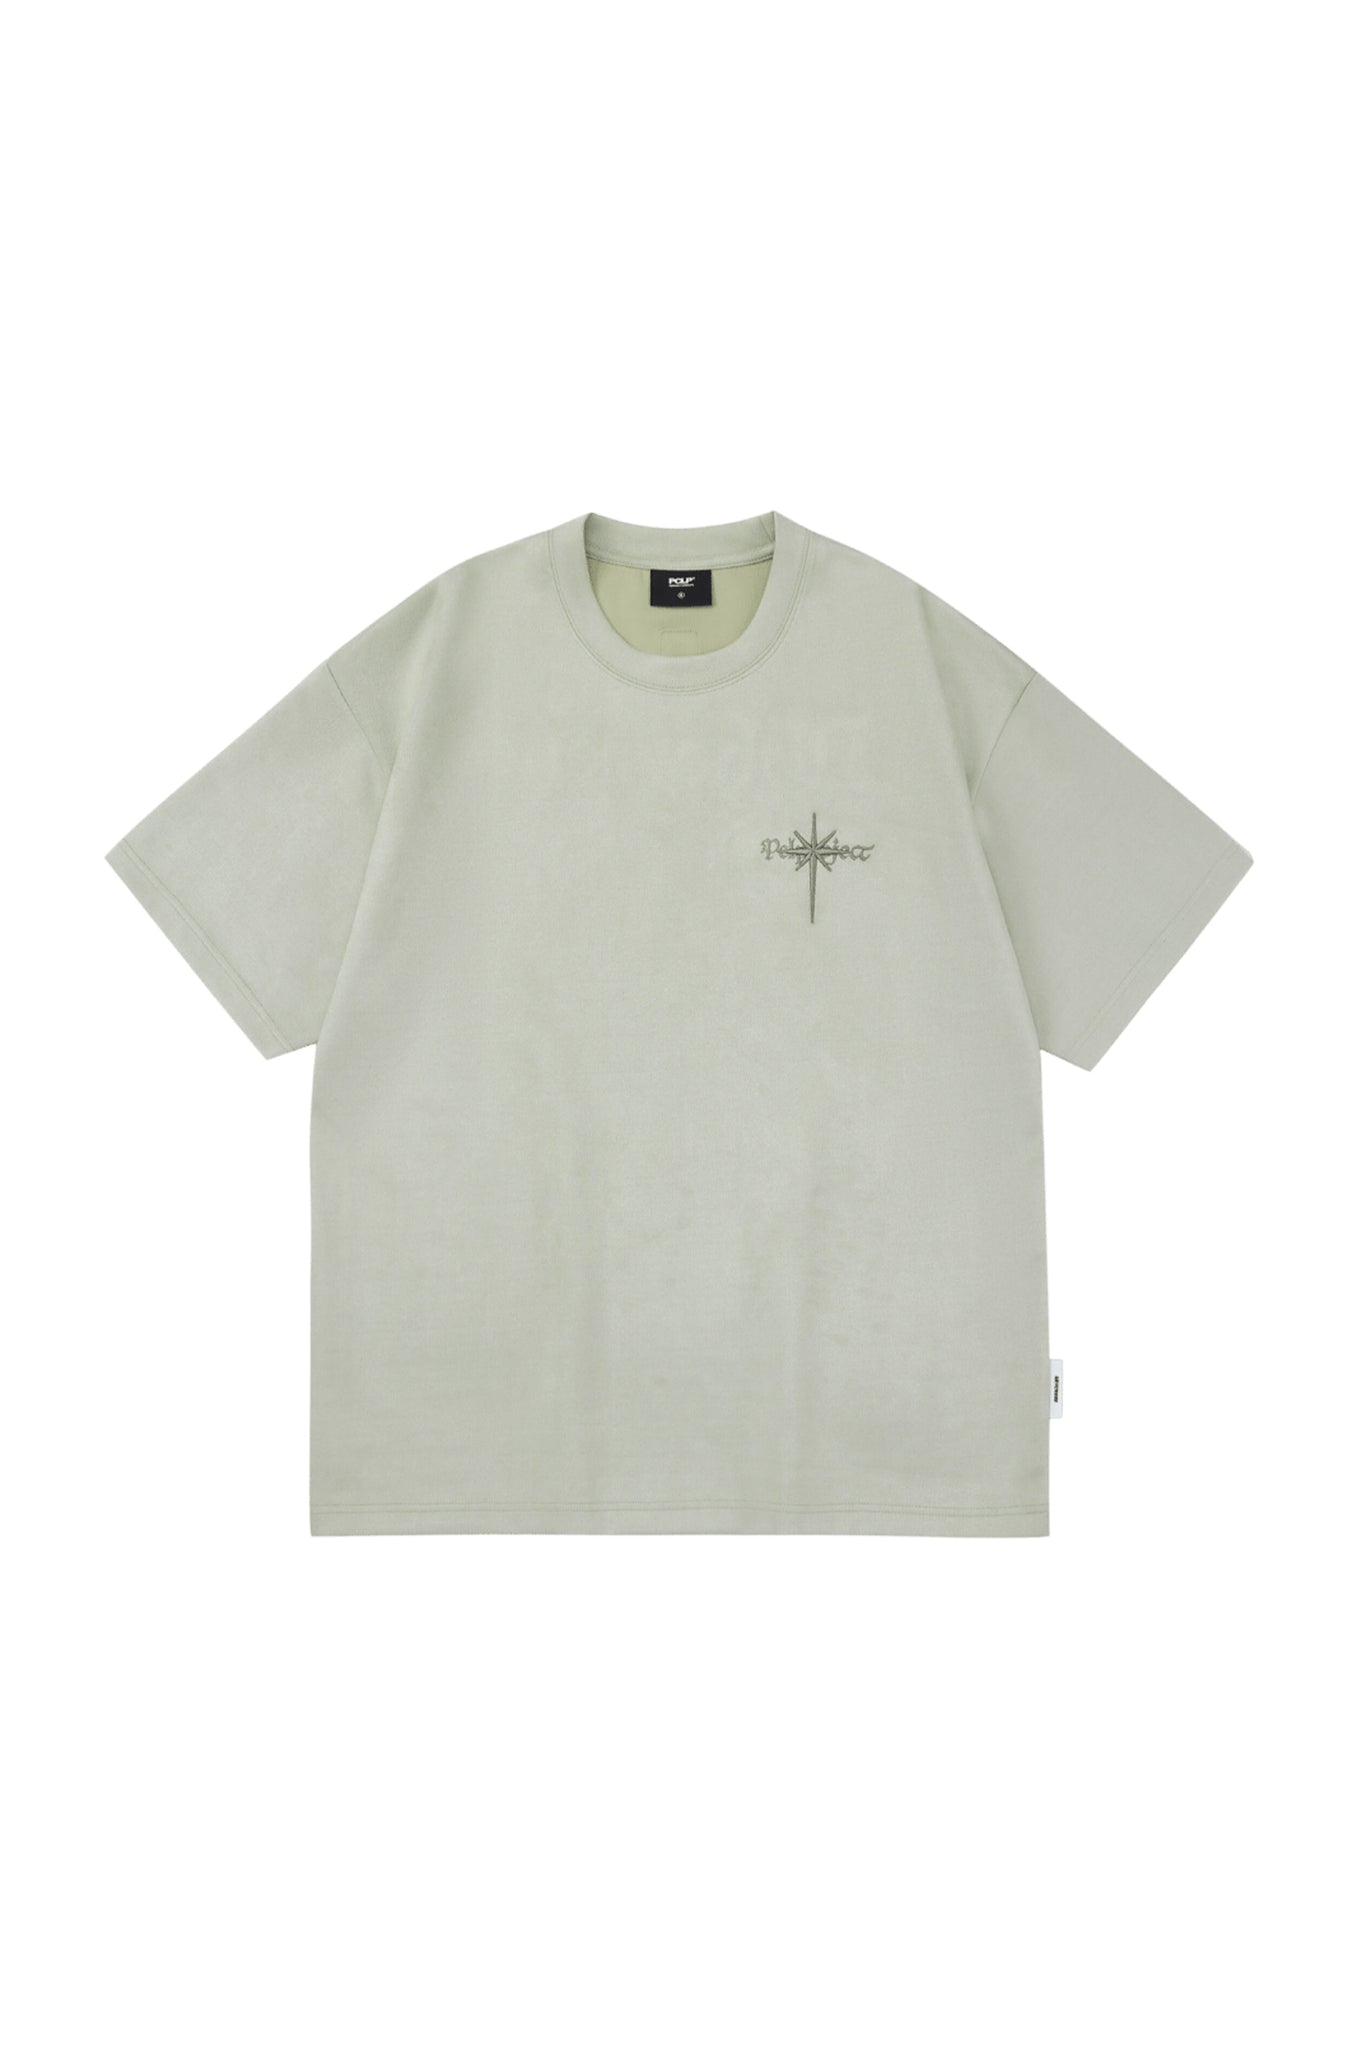 American Suede T-Shirt